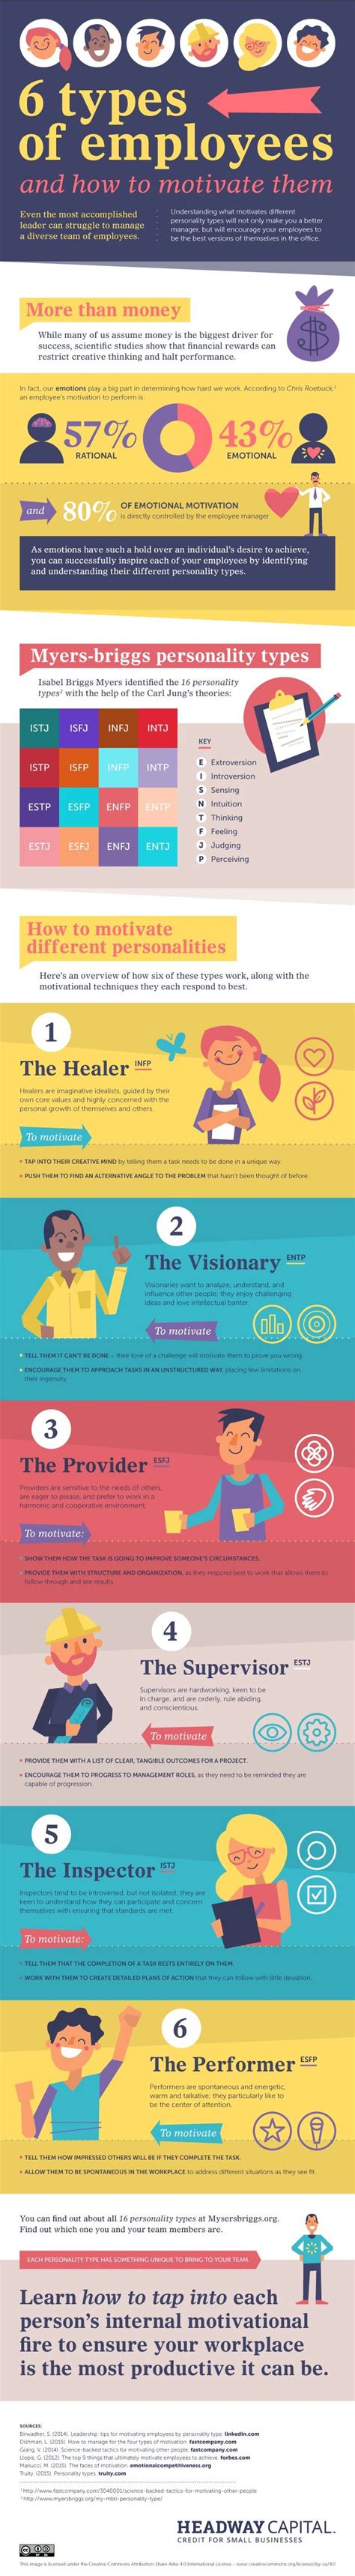 How Managers Can Motivate 6 Employee Personality Types